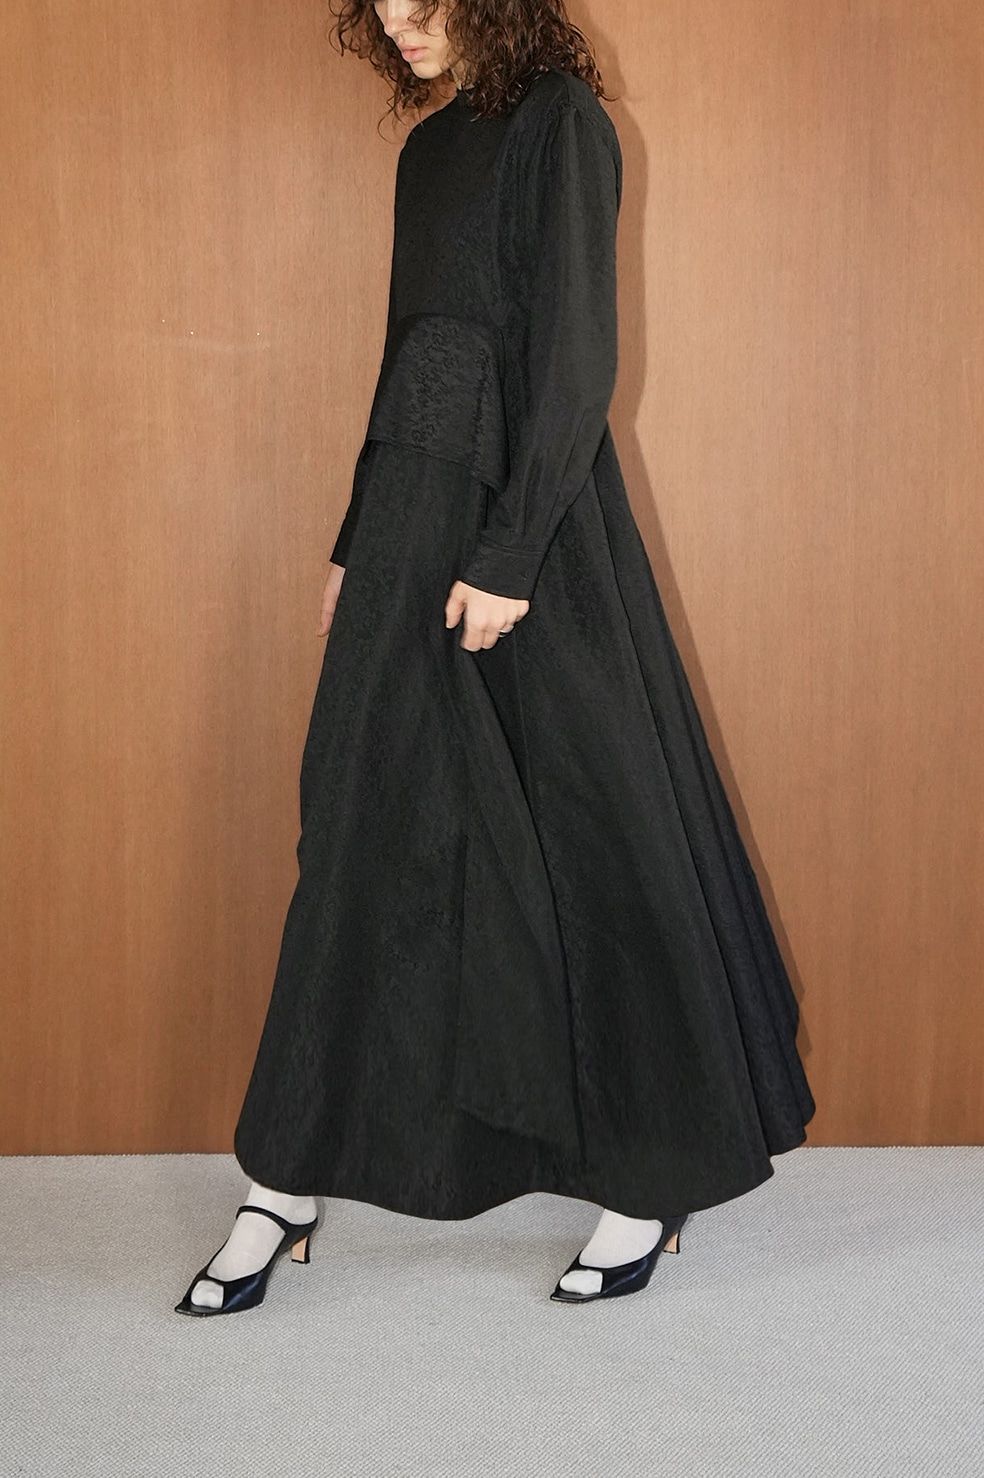 CLANE - ジャガードワンピース - 2WAY JAQUARD ONEPIECE - BLACK 